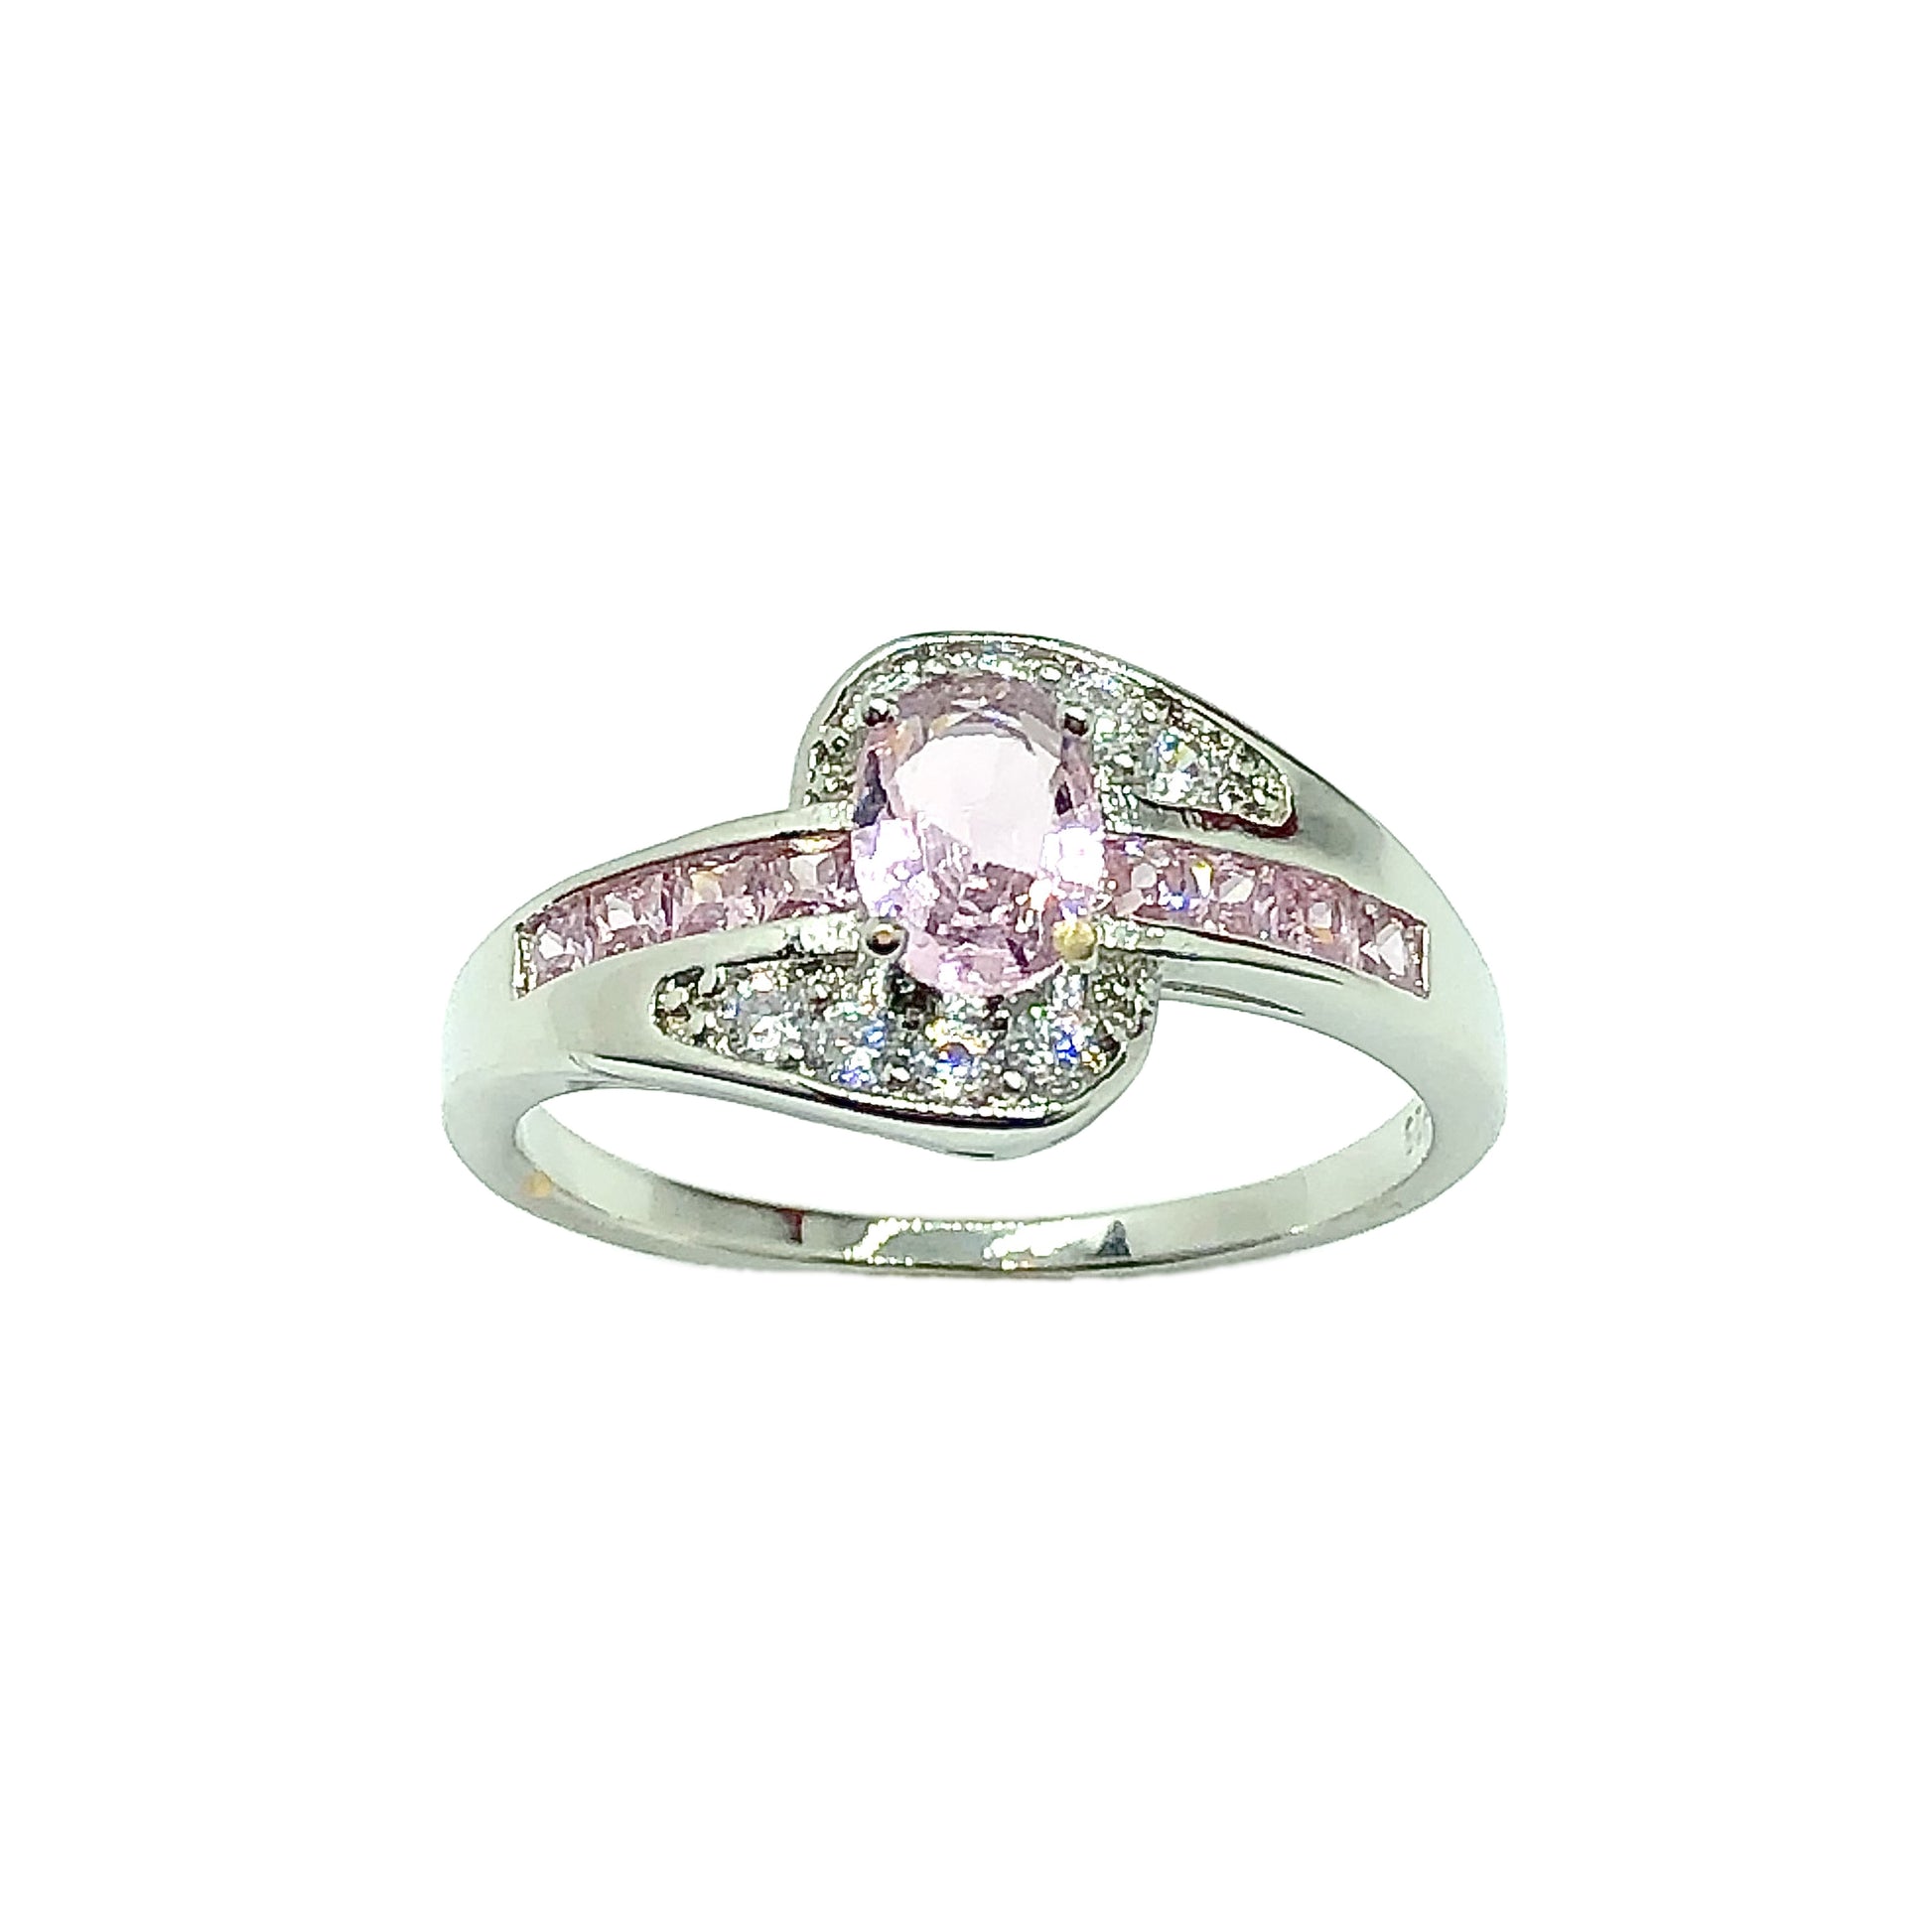 Fashion Jewelry - Womens Shimmery Pink Cz Band Ring | Blingschlingers Jewelry